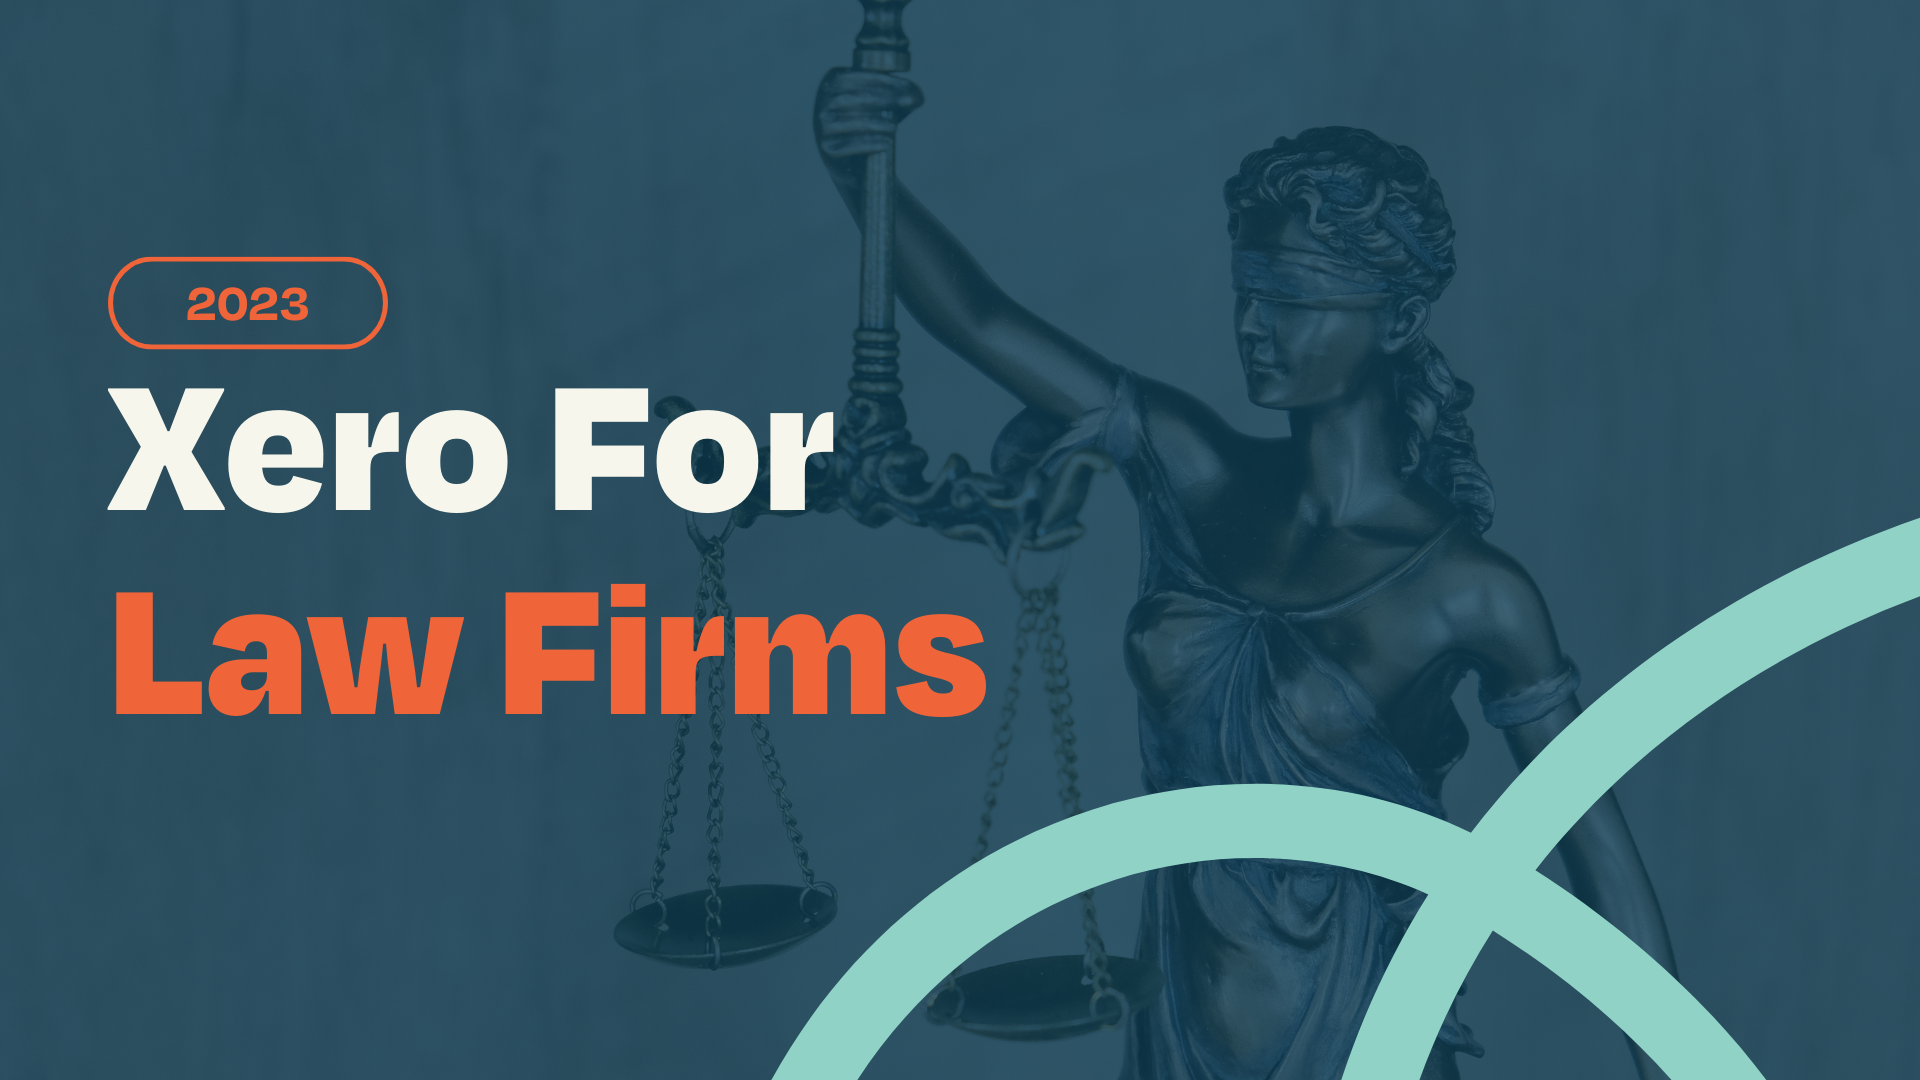 Xero for Law Firms - Streamline Your Financial Management